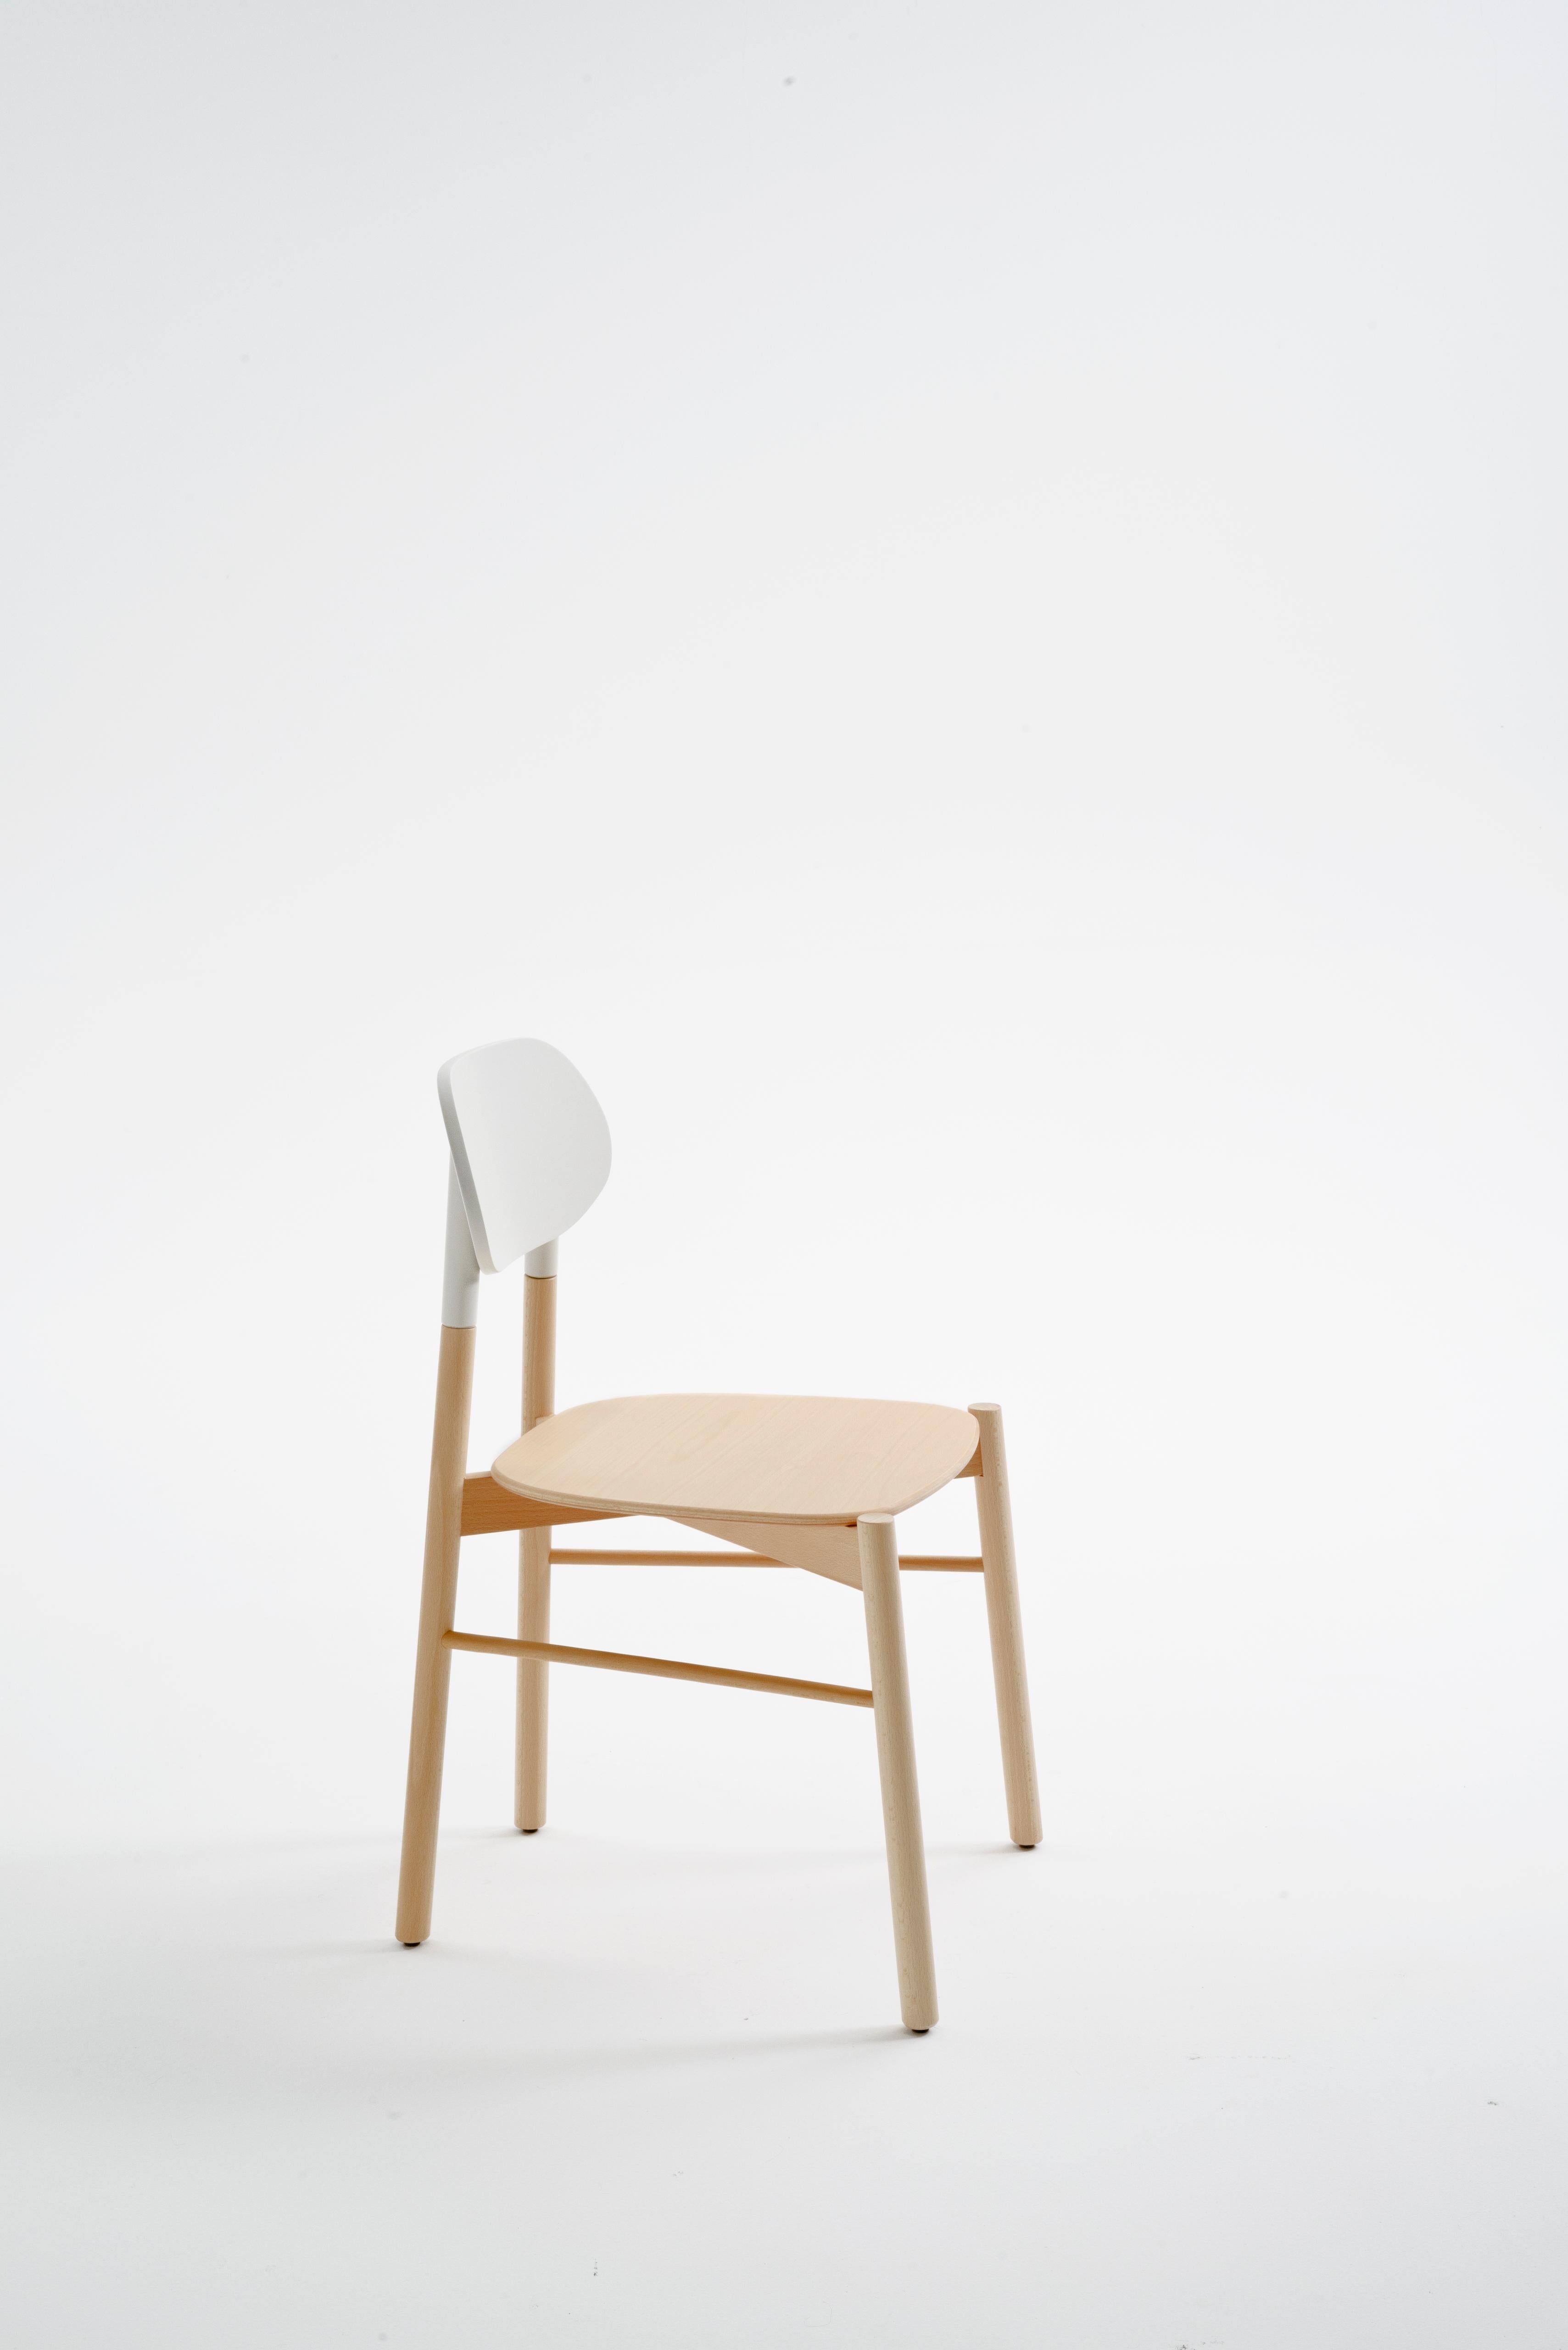 An essential chair in the form, yet precious in colors. Tapered and elongated, the legs of the seat are inspired by the bokken, a wooden replica of the Japanese sword used in the training of the Japanese martial art of Aikido and Kendo.
Bokken